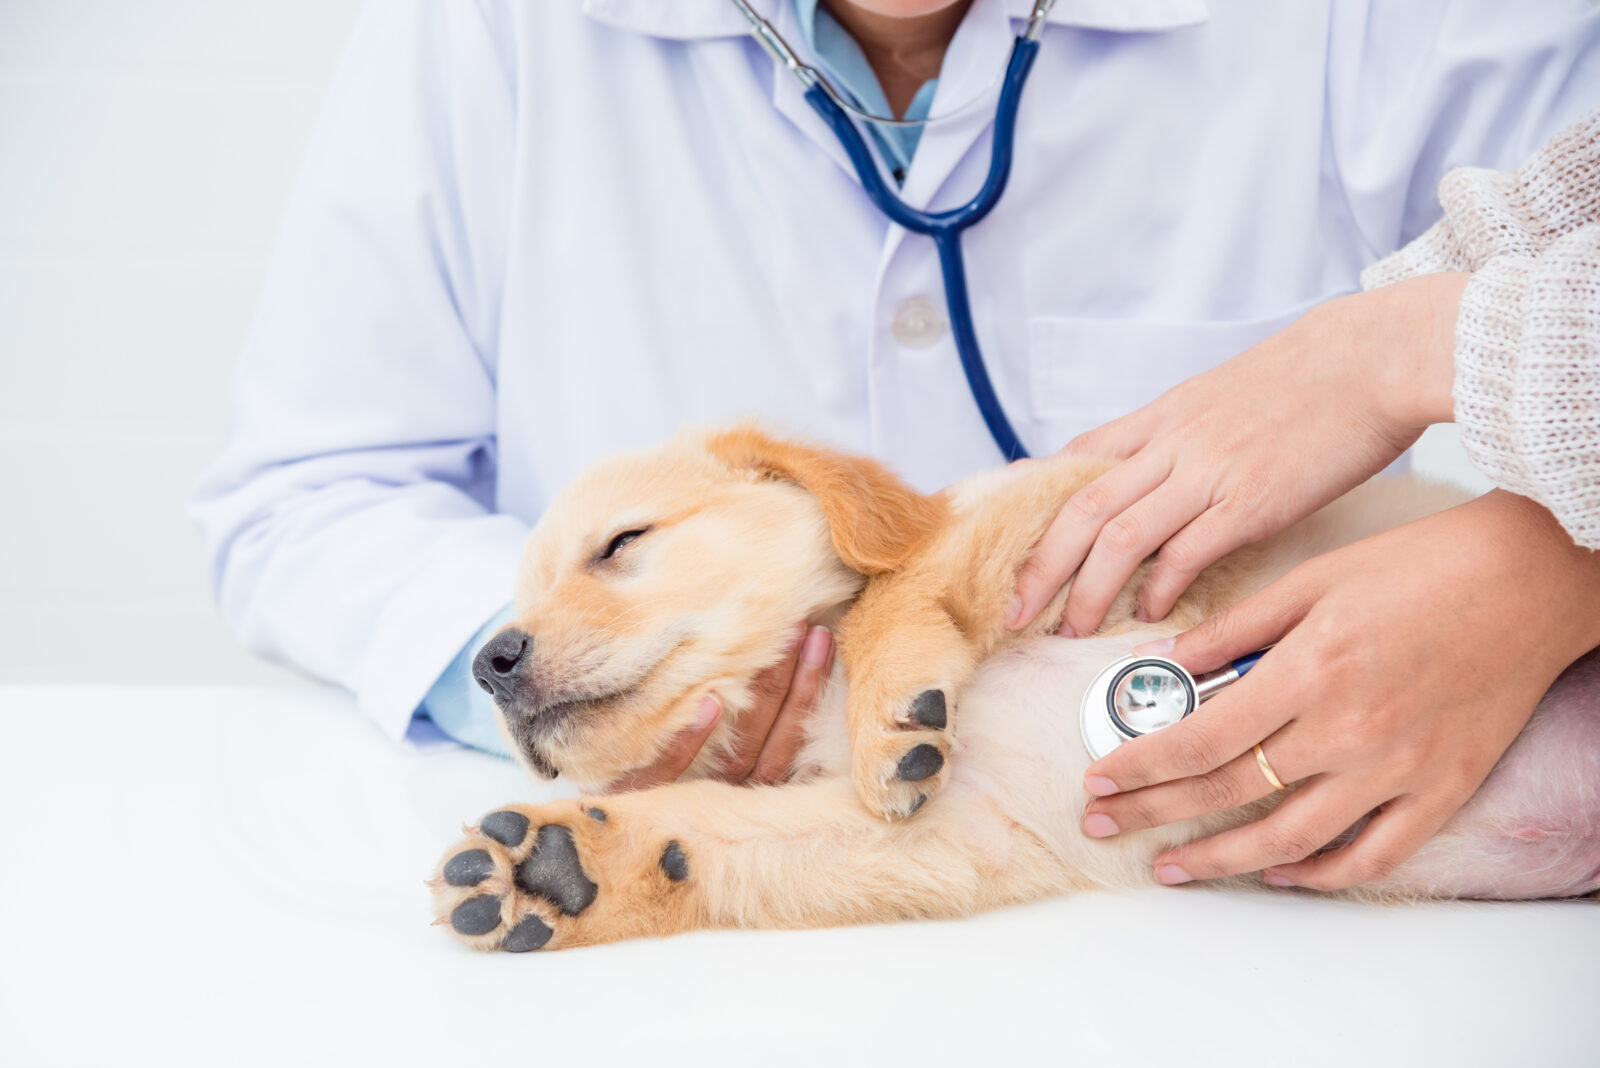 closeup shot of veterinarian hands checking dog by stethoscope